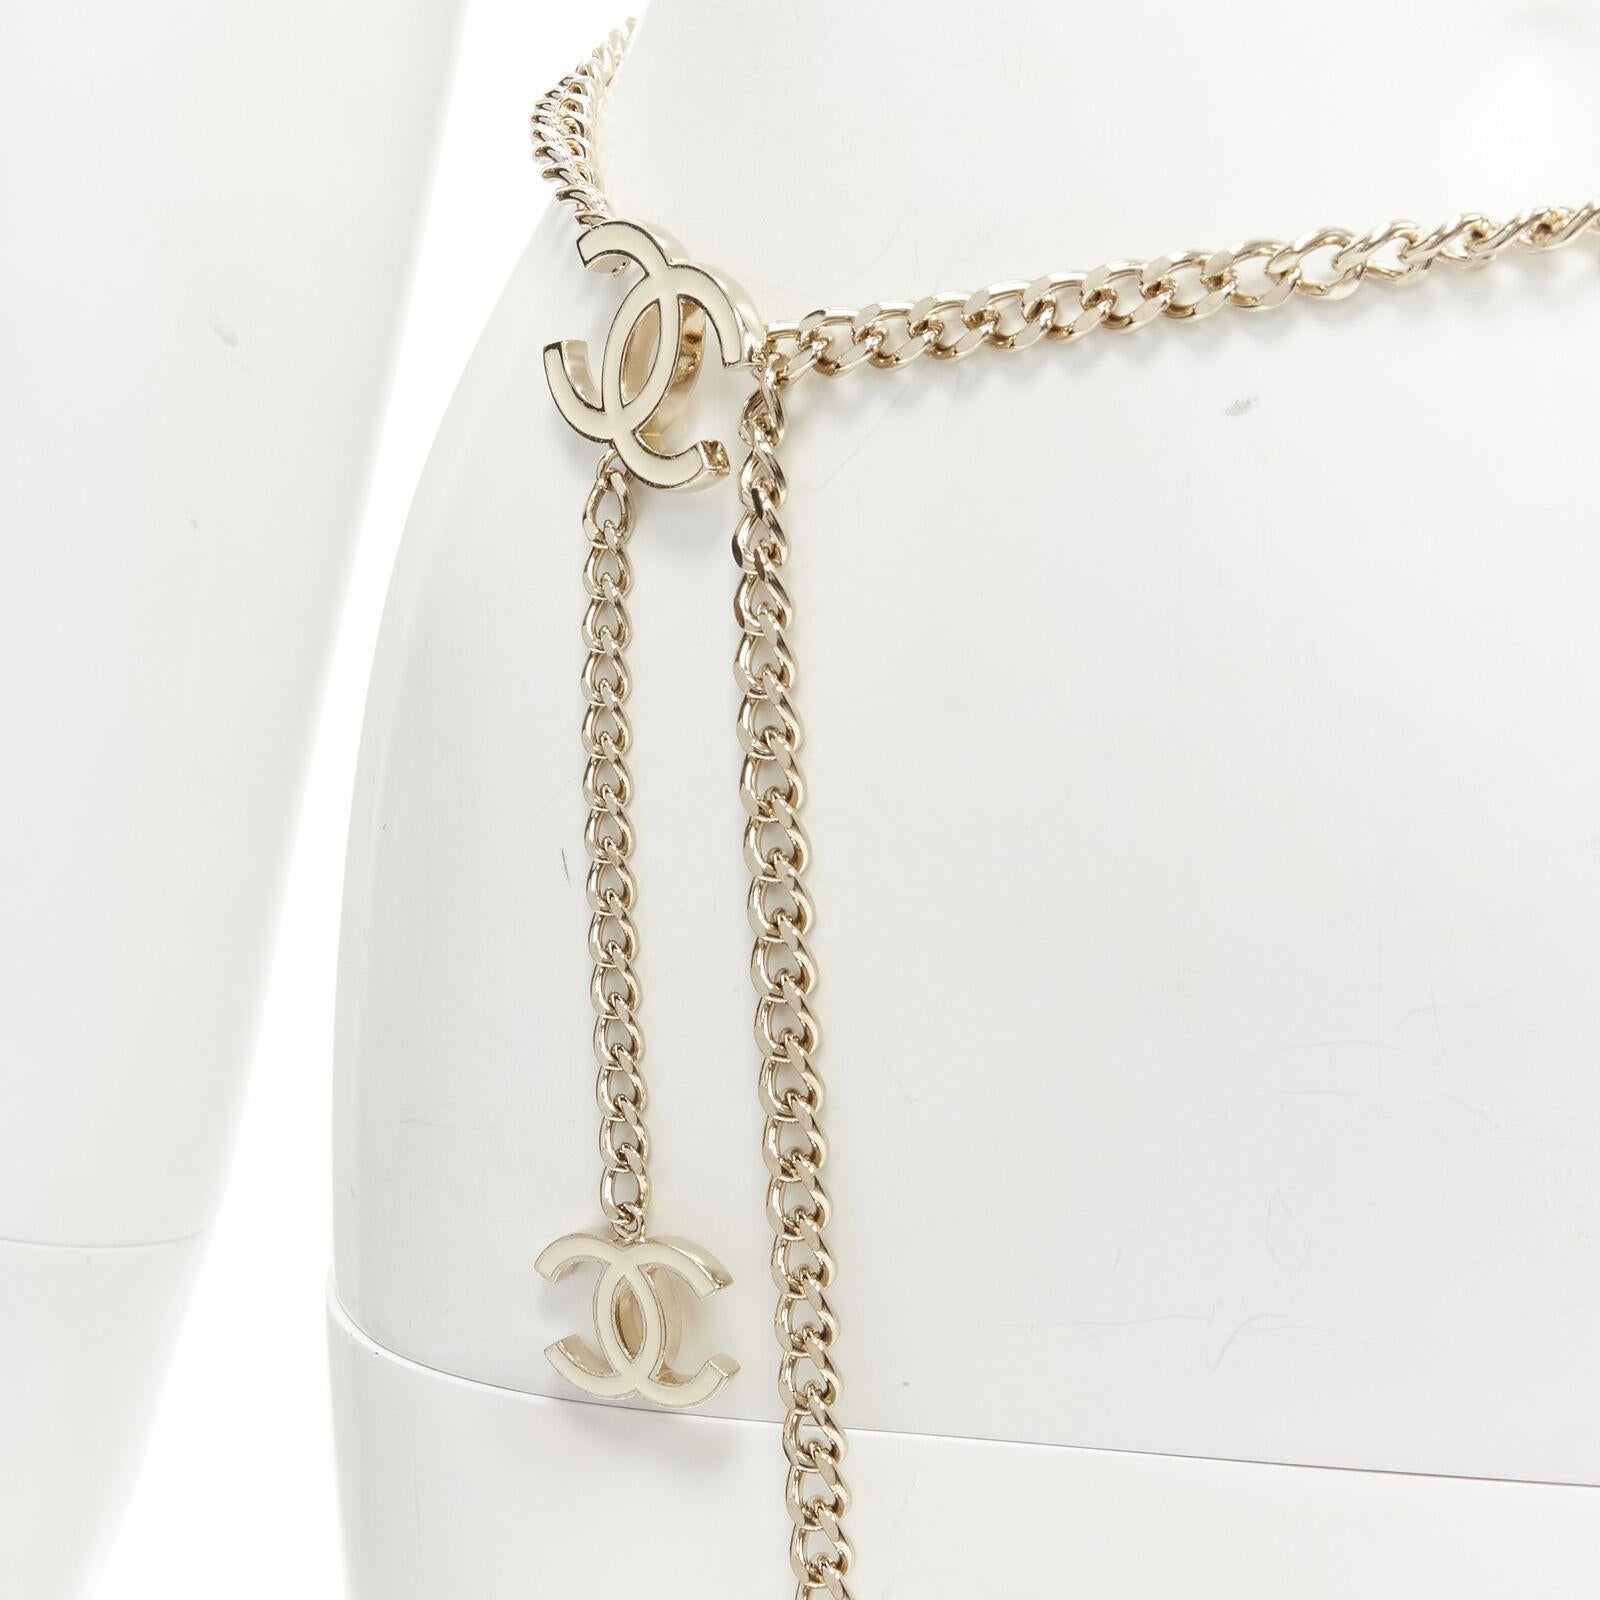 CHANEL 05V gold metal chain triple CC charm statement belt
Reference: LNKO/A02074
Brand: Chanel
Designer: Karl Lagerfeld
Collection: 2015
Material: Metal
Color: Gold
Pattern: Solid
Closure: Hook & Eye
Made in: France

CONDITION:
Condition: